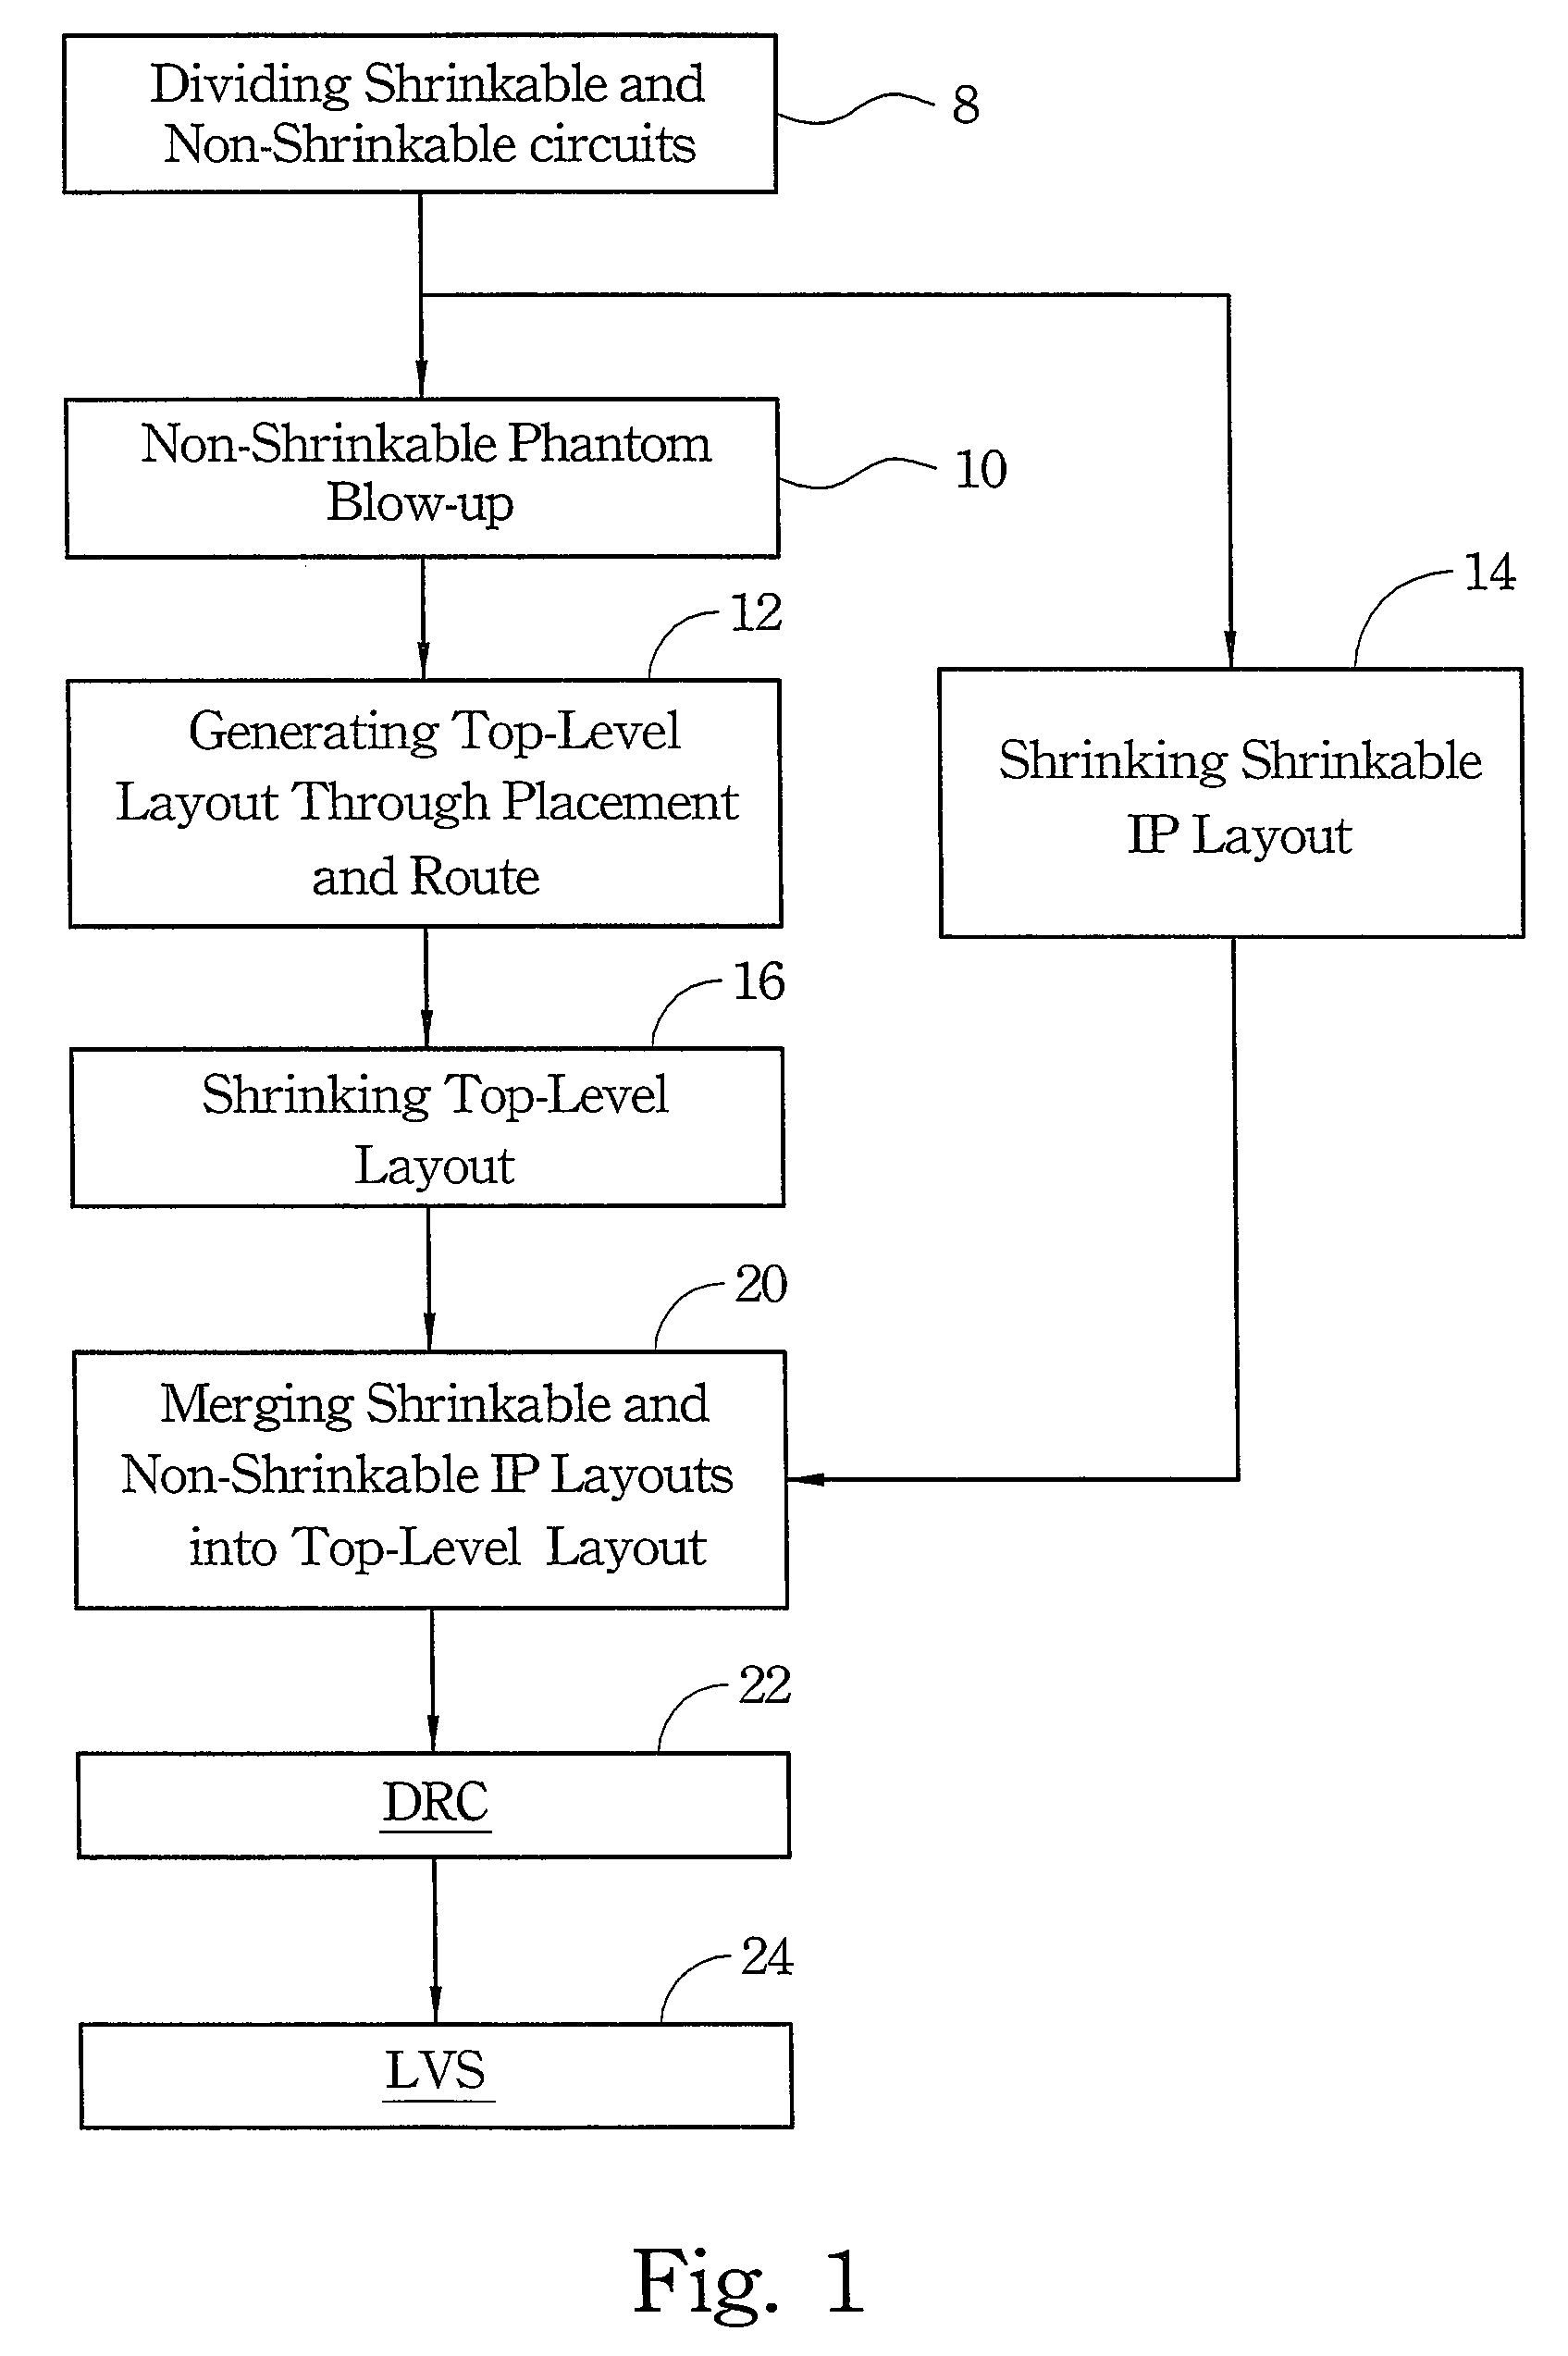 Design flow for shrinking circuits having non-shrinkable IP layout